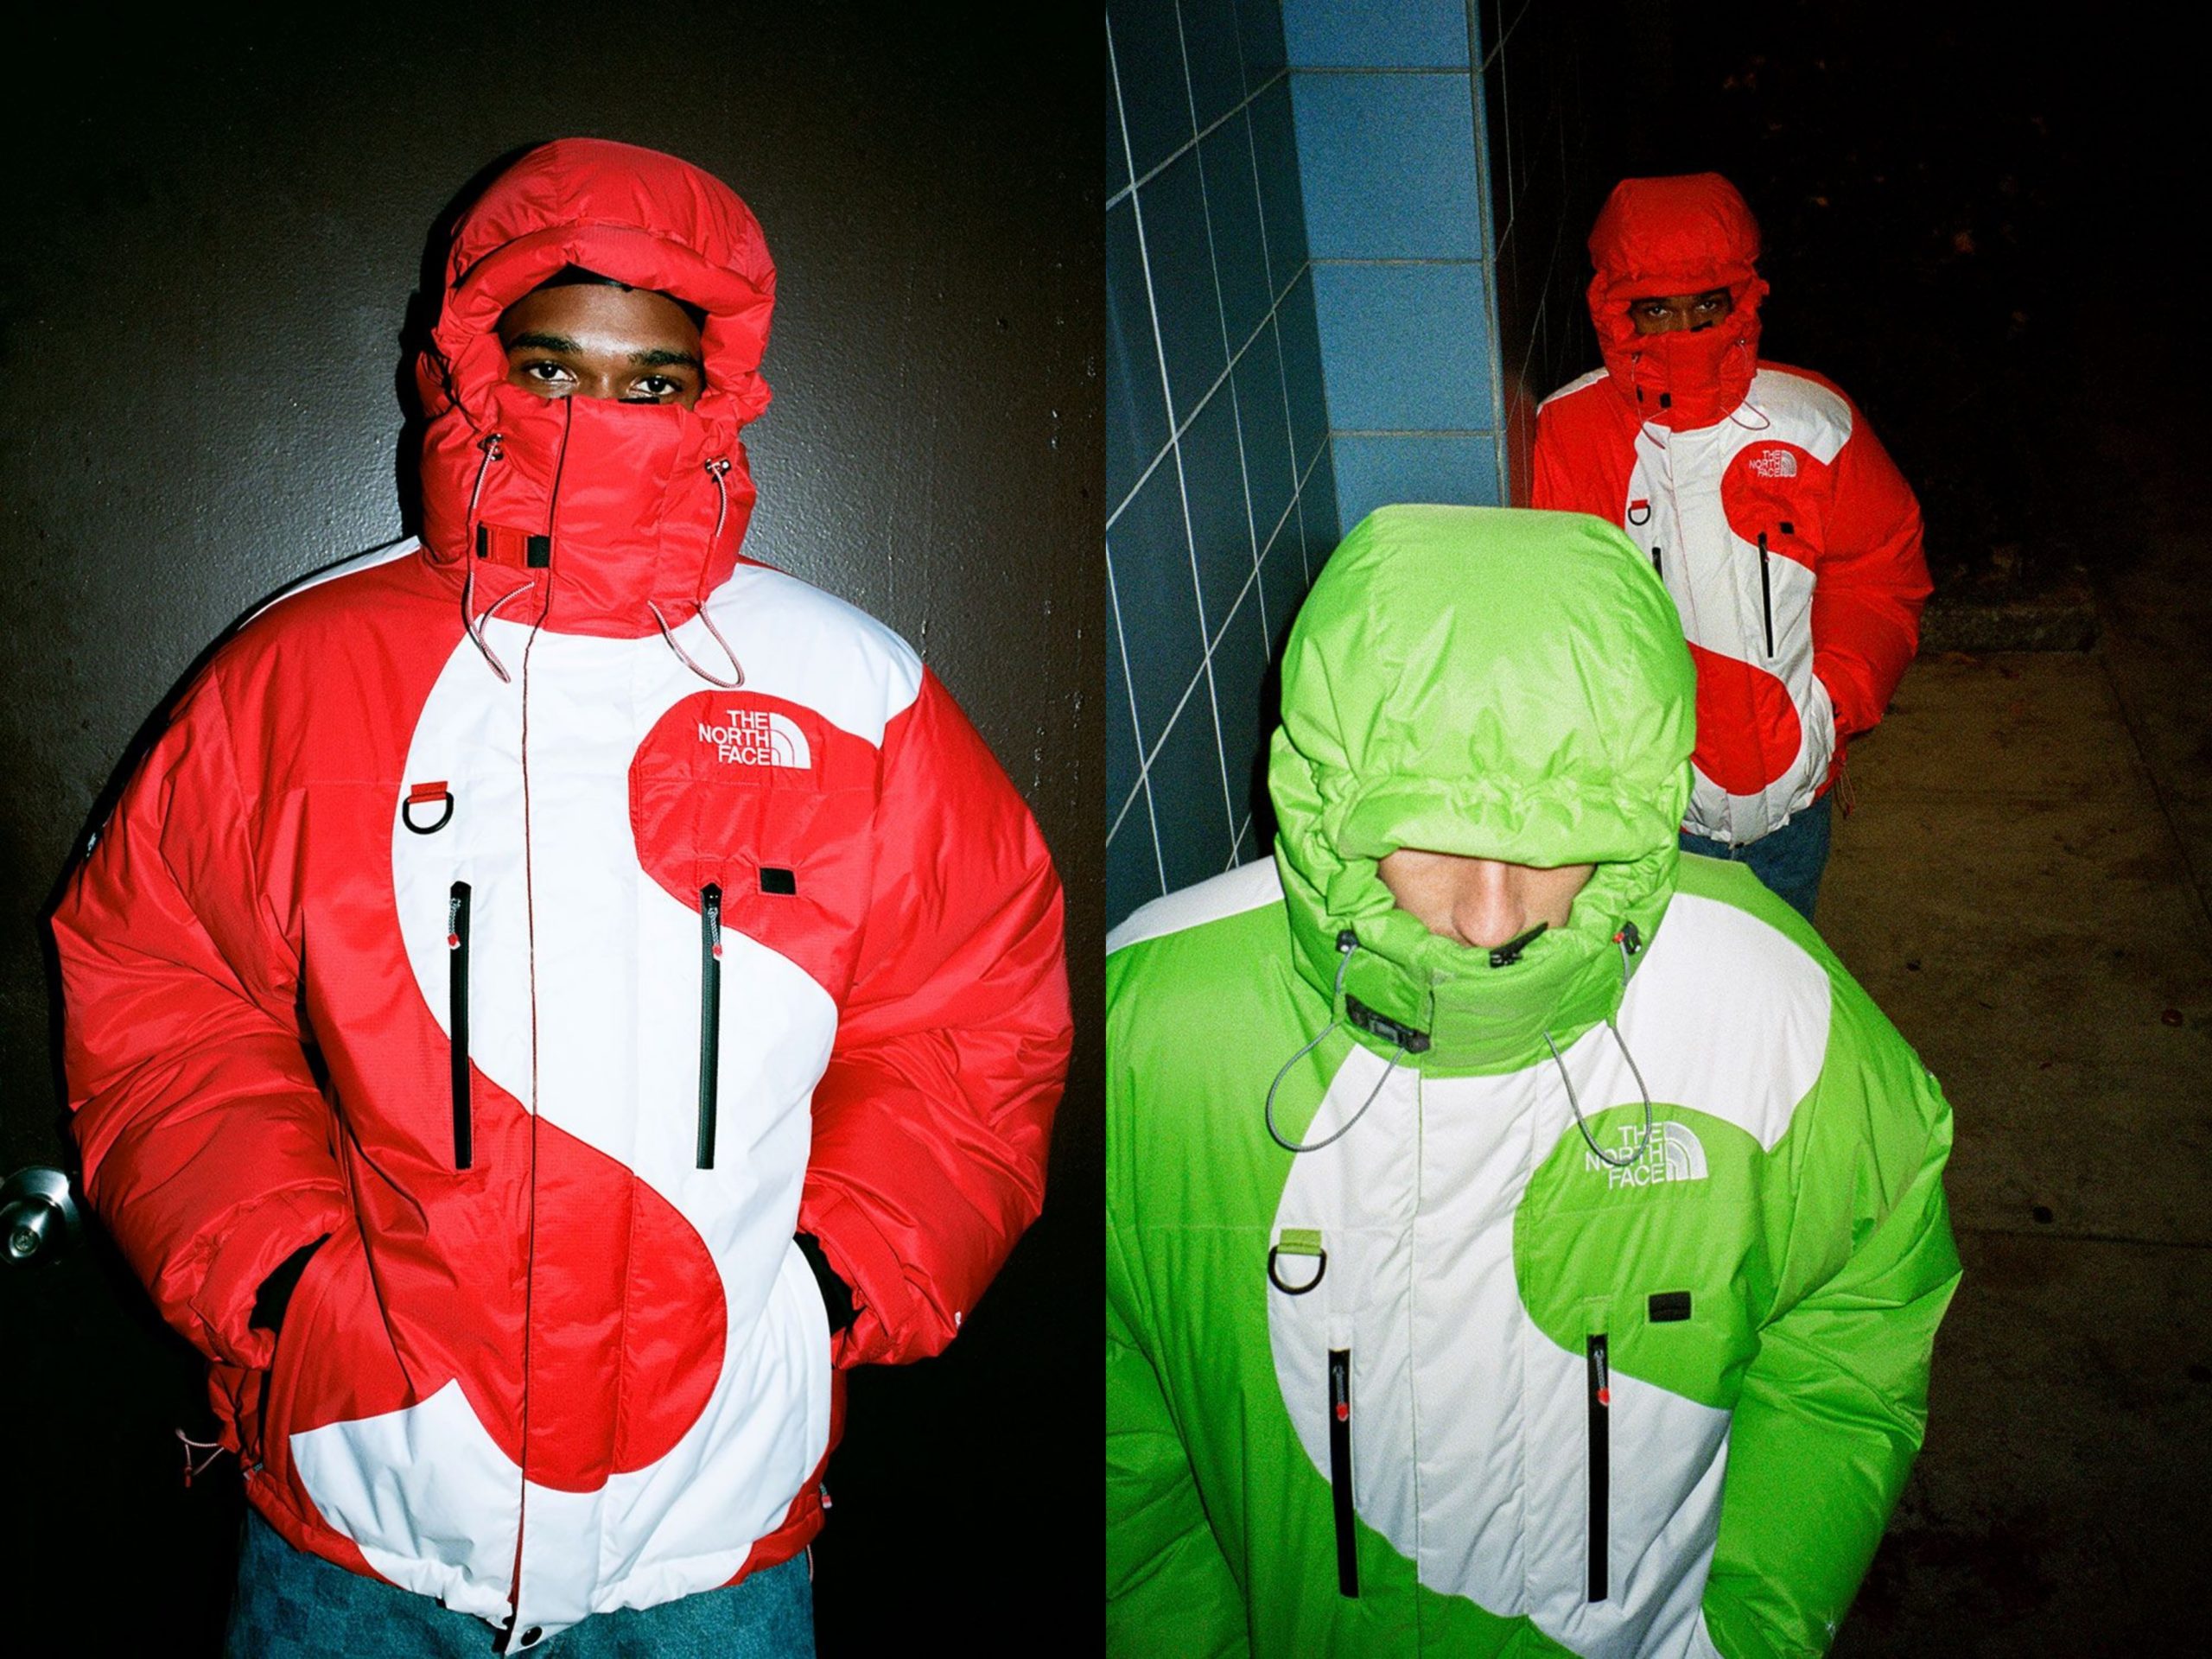 Supreme x North Face Return for AW20